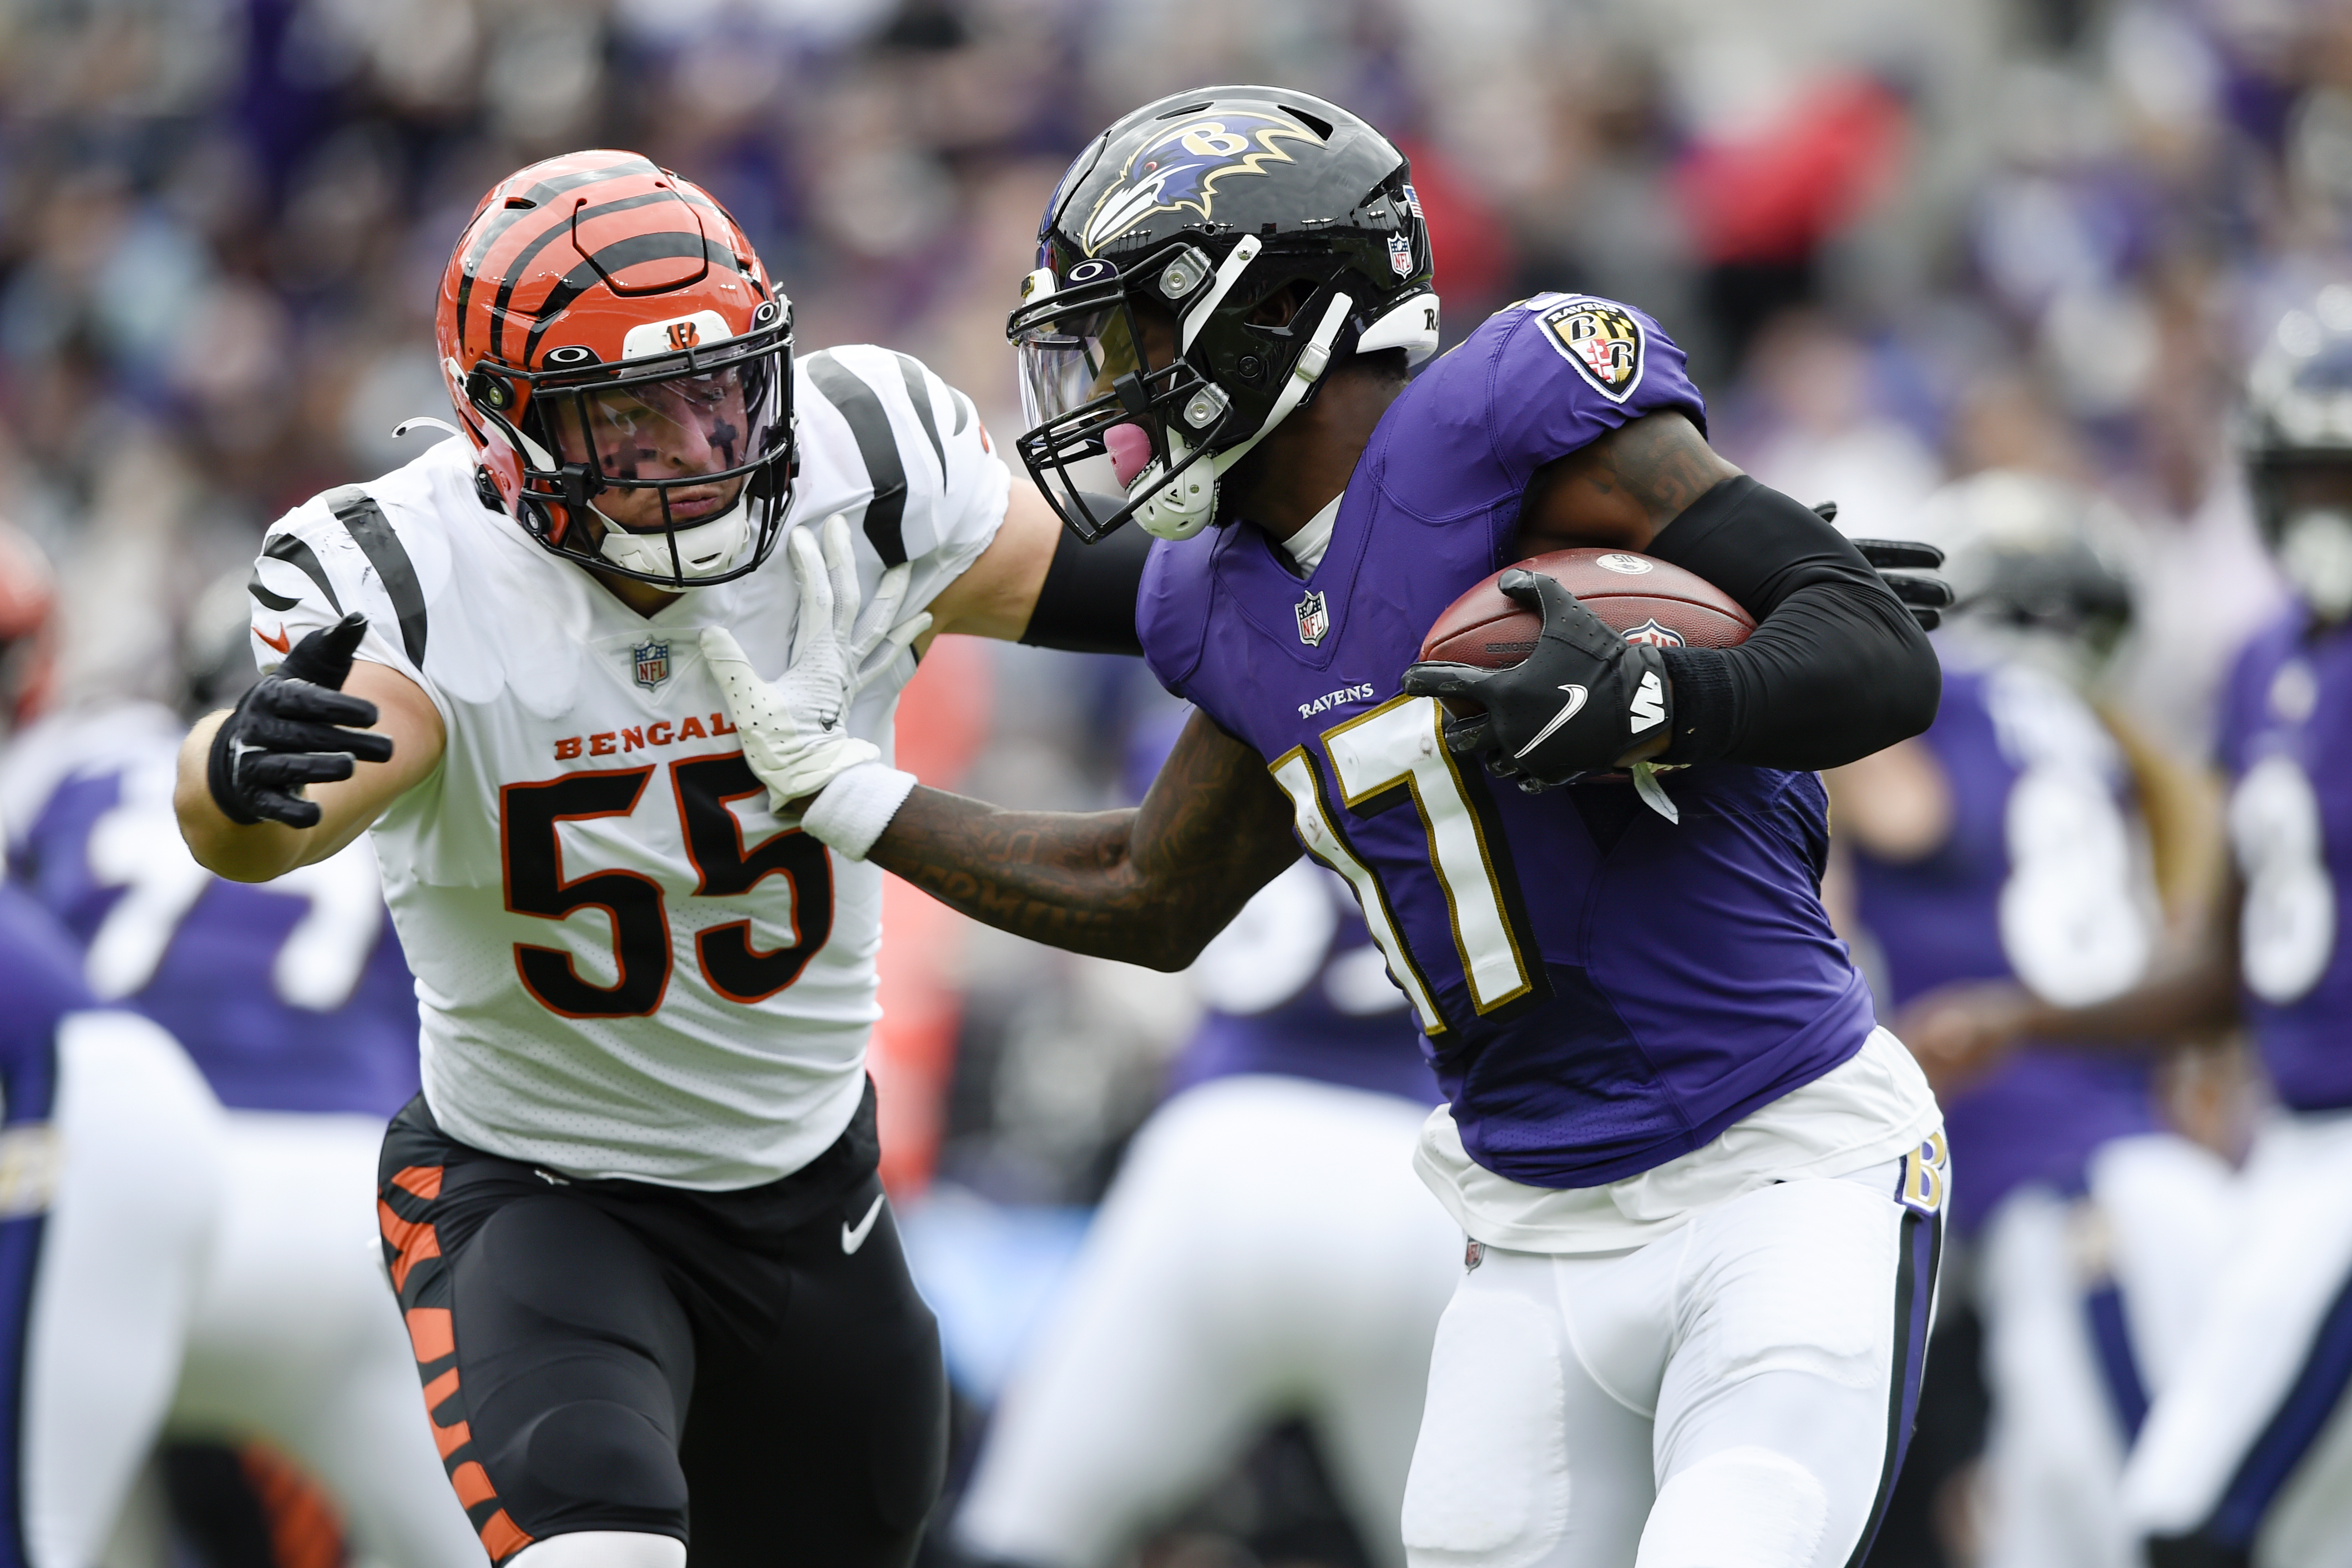 Wilson's return from injury 'critical' for Bengals' defense